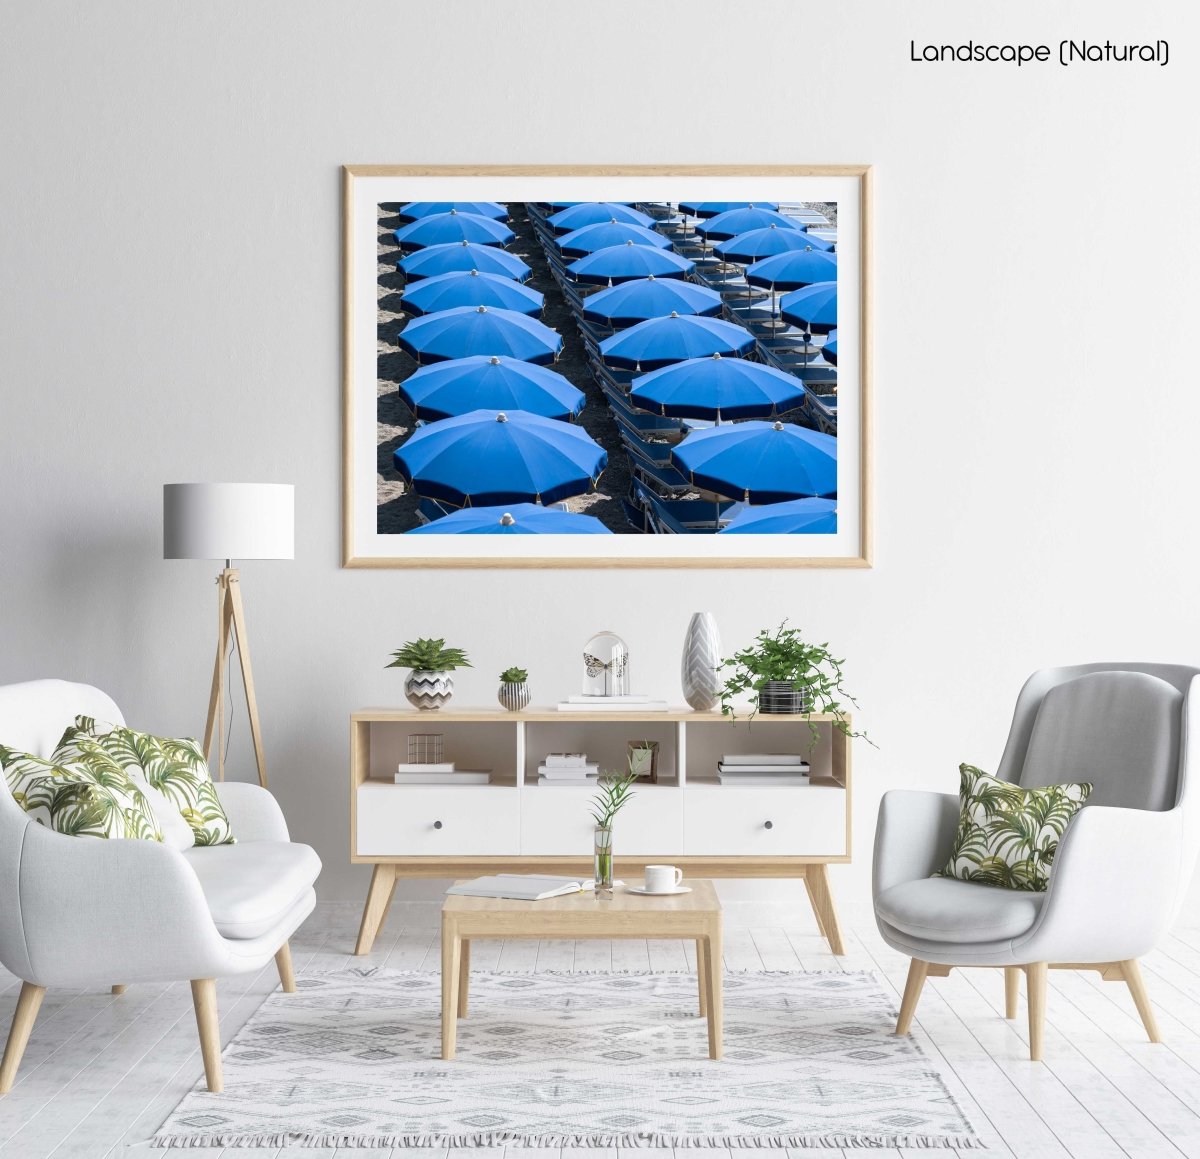 Rows of blue umbrellas and chairs on italian beach in a natural fine art frame